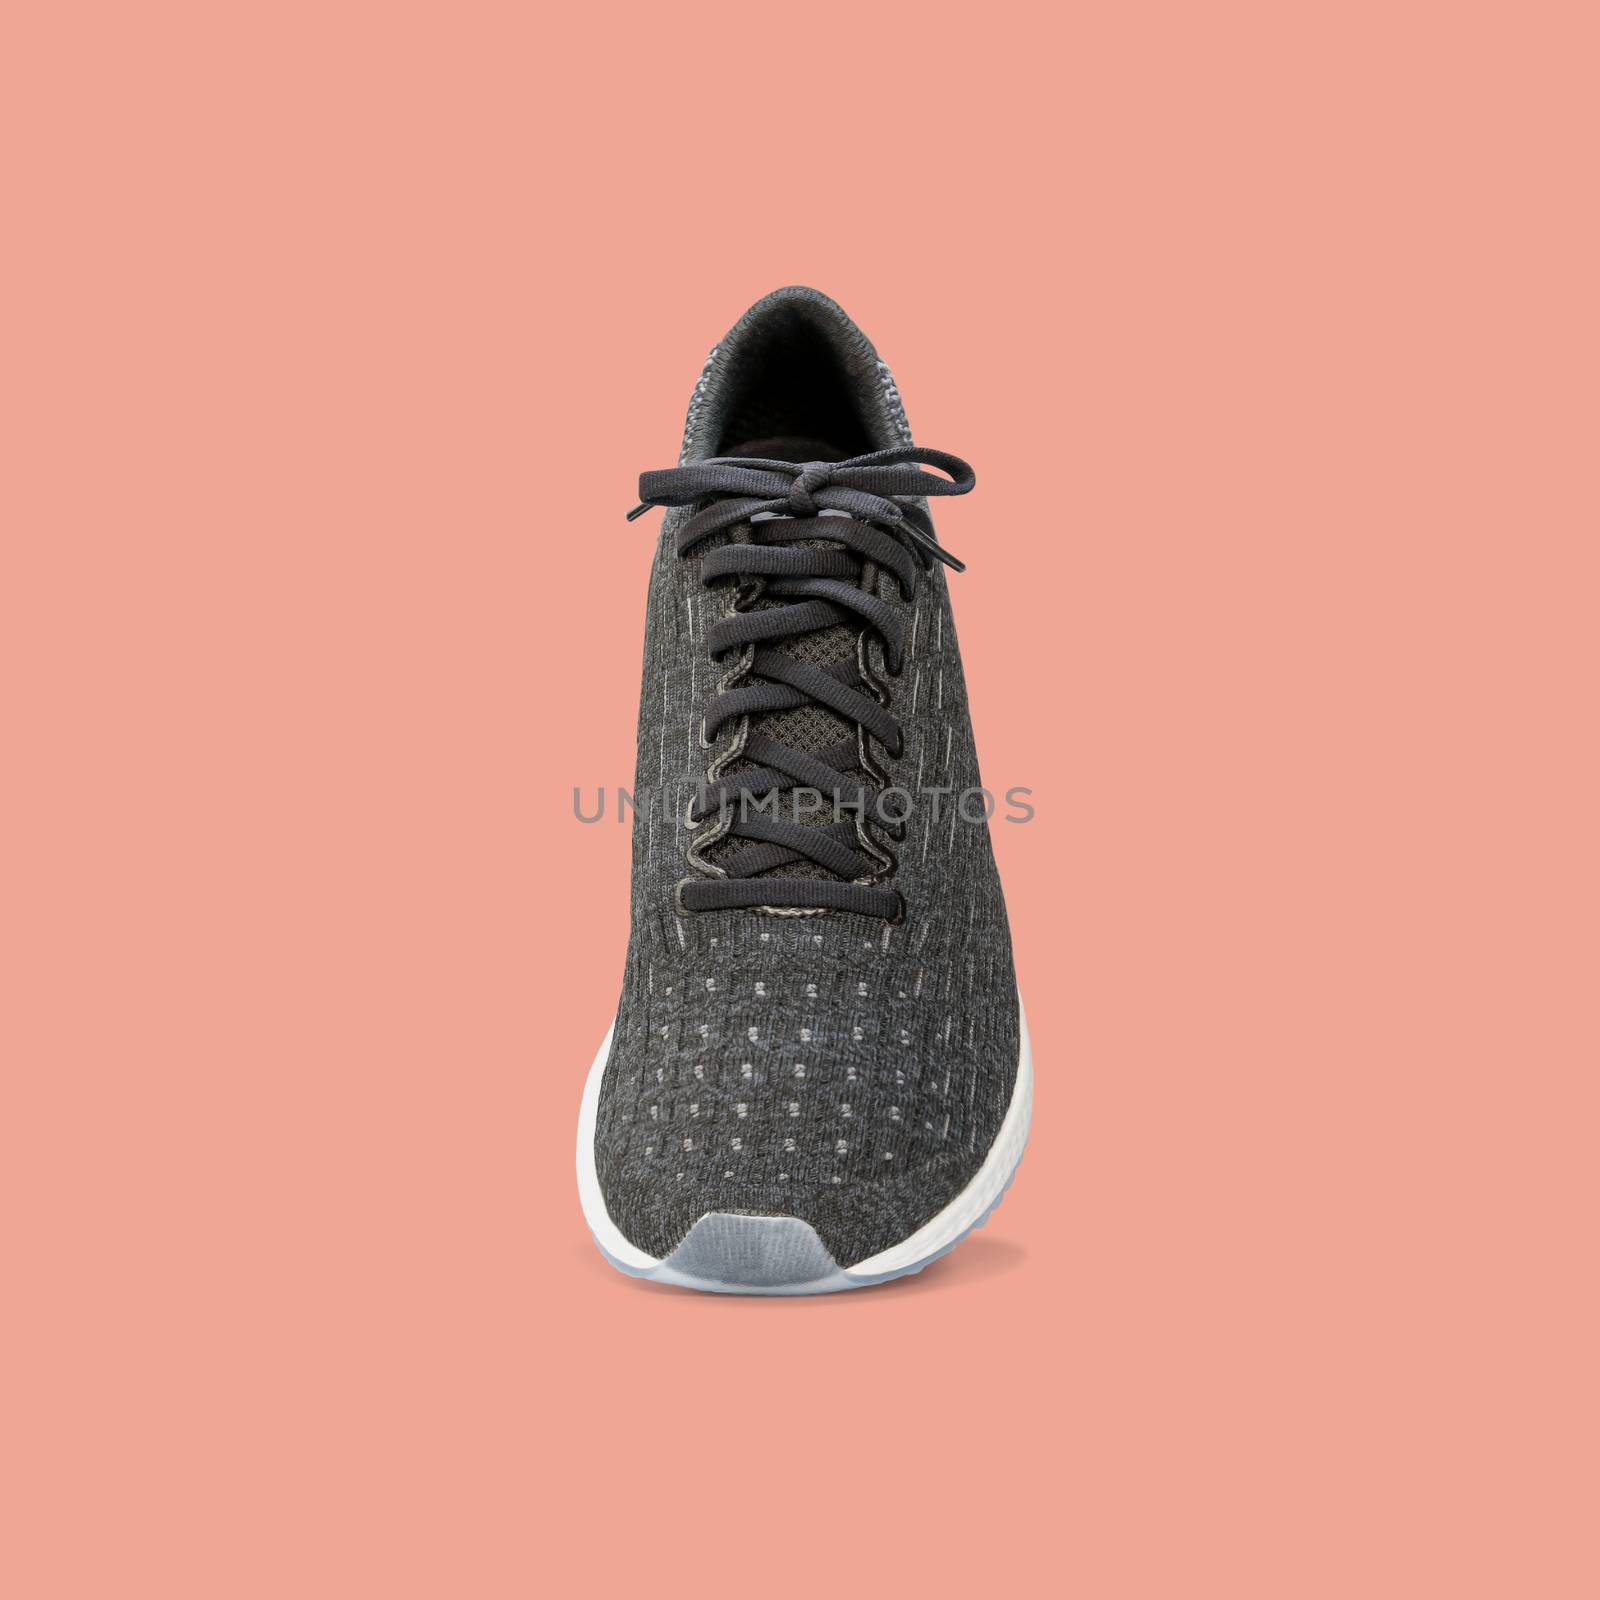 Fashion running sneaker shoes isolated on beautiful pastel color background, with clipping path.